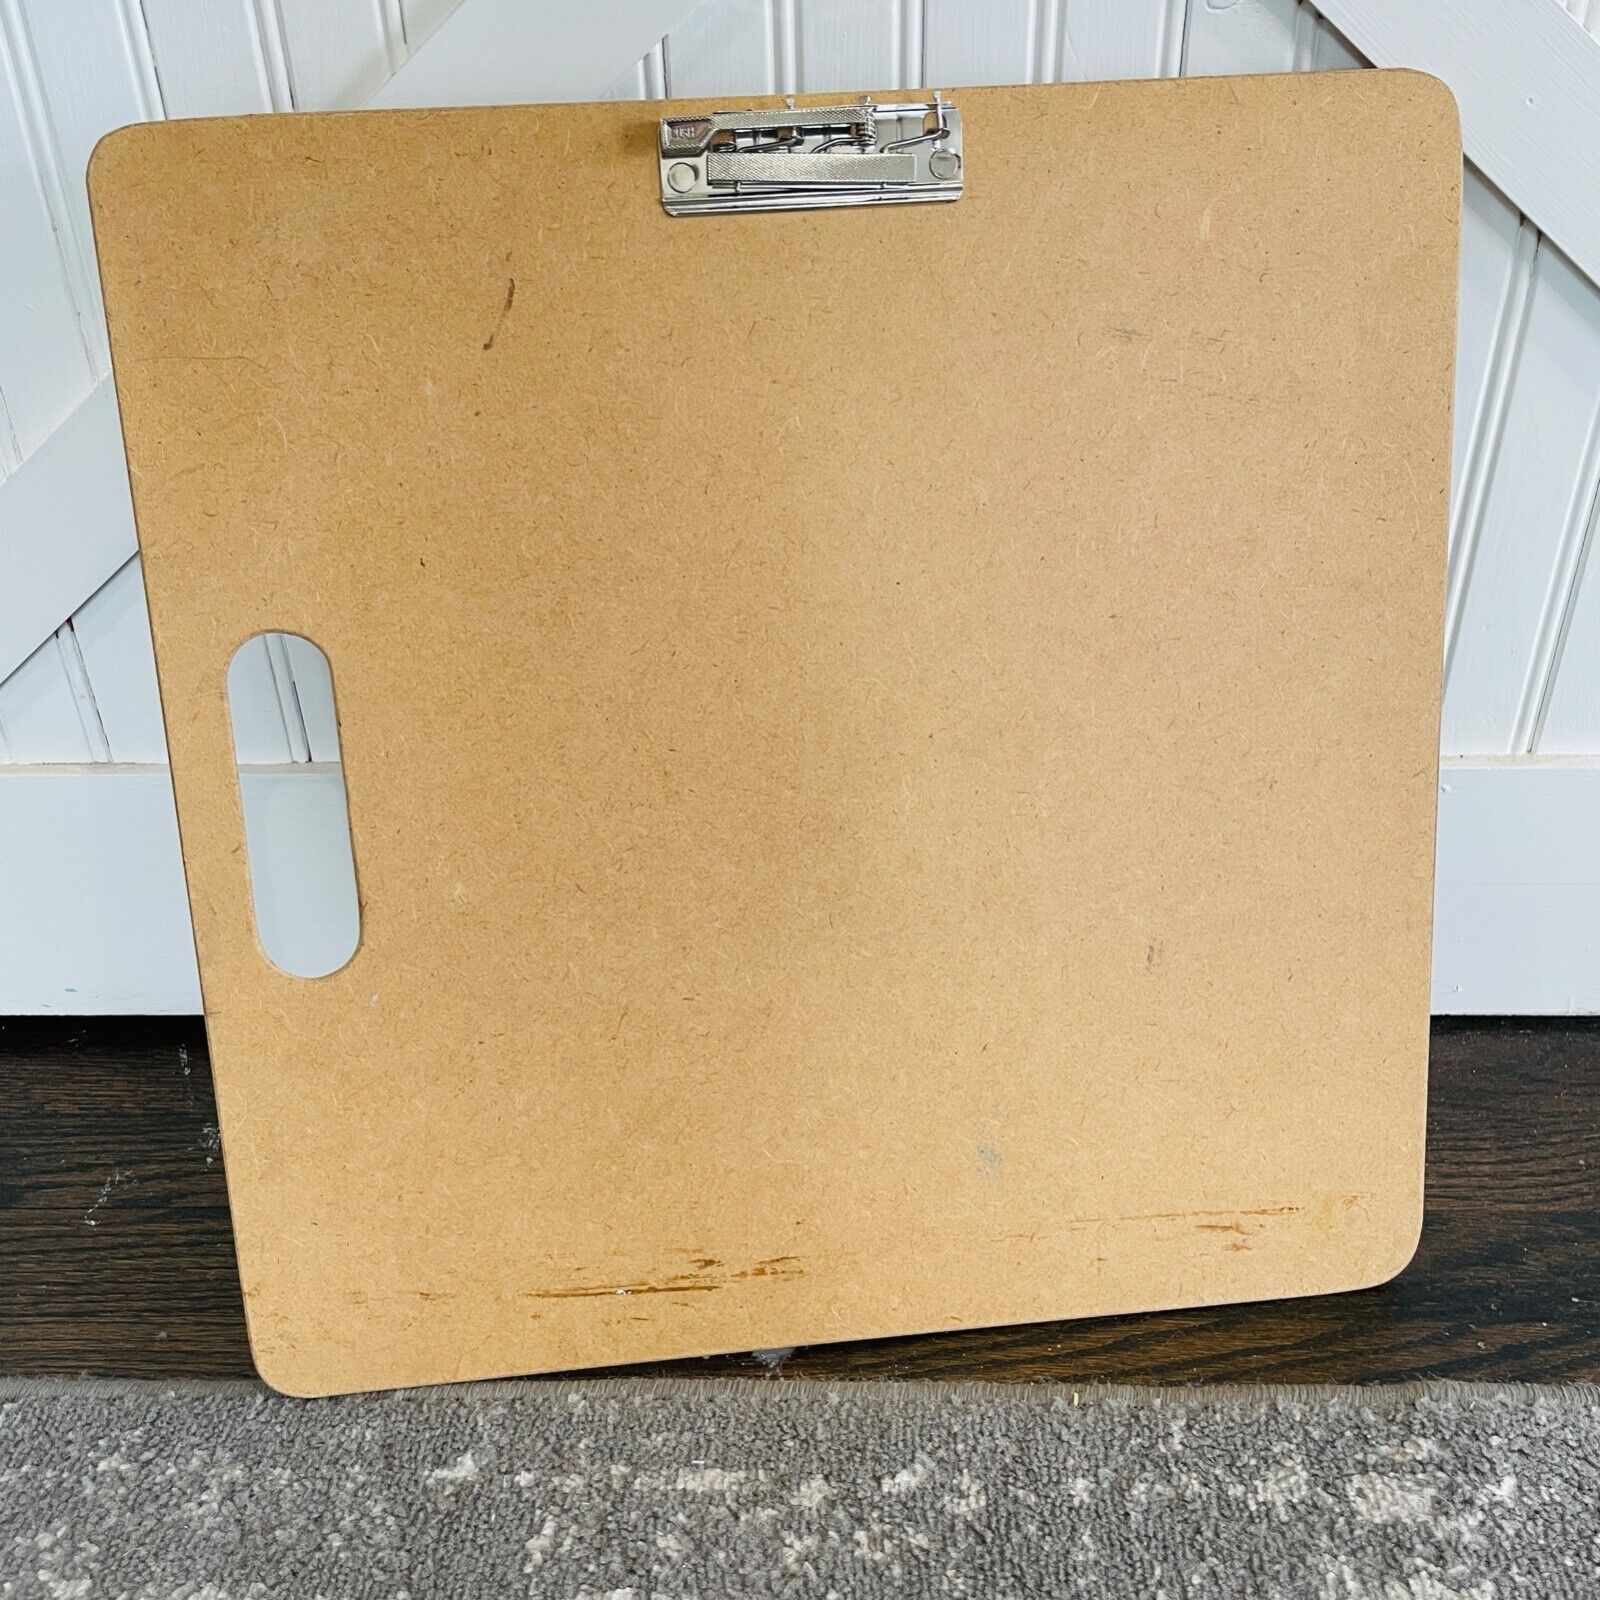 Large 18x18 Inch Artist Sketch Board Drawing Clipboard with Built-In Handle